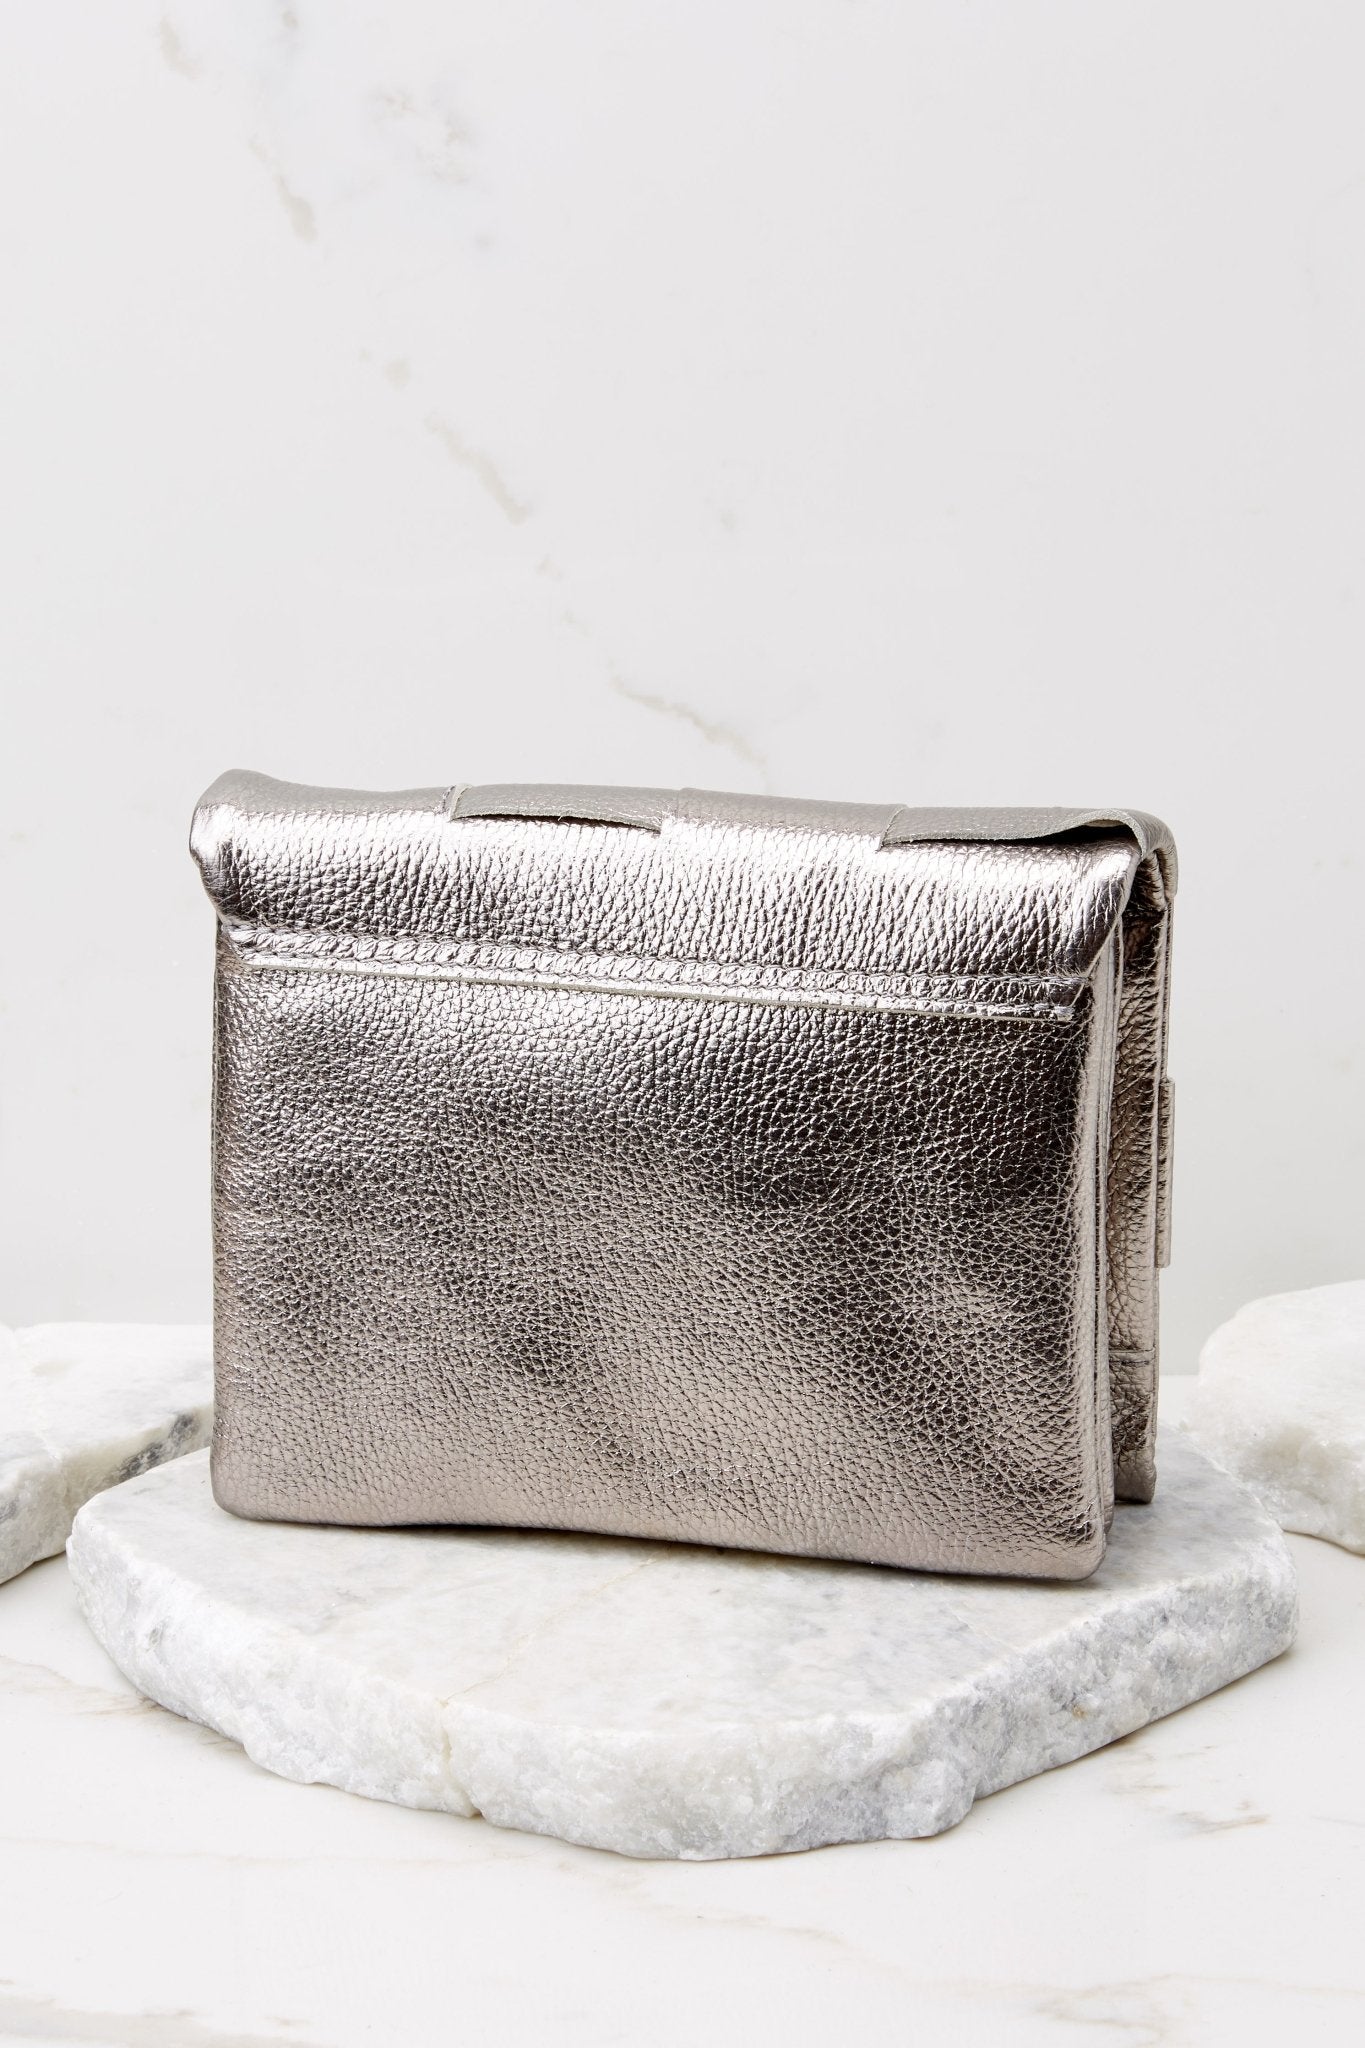 Caught In A Moment Silver Leather Bag - Red Dress